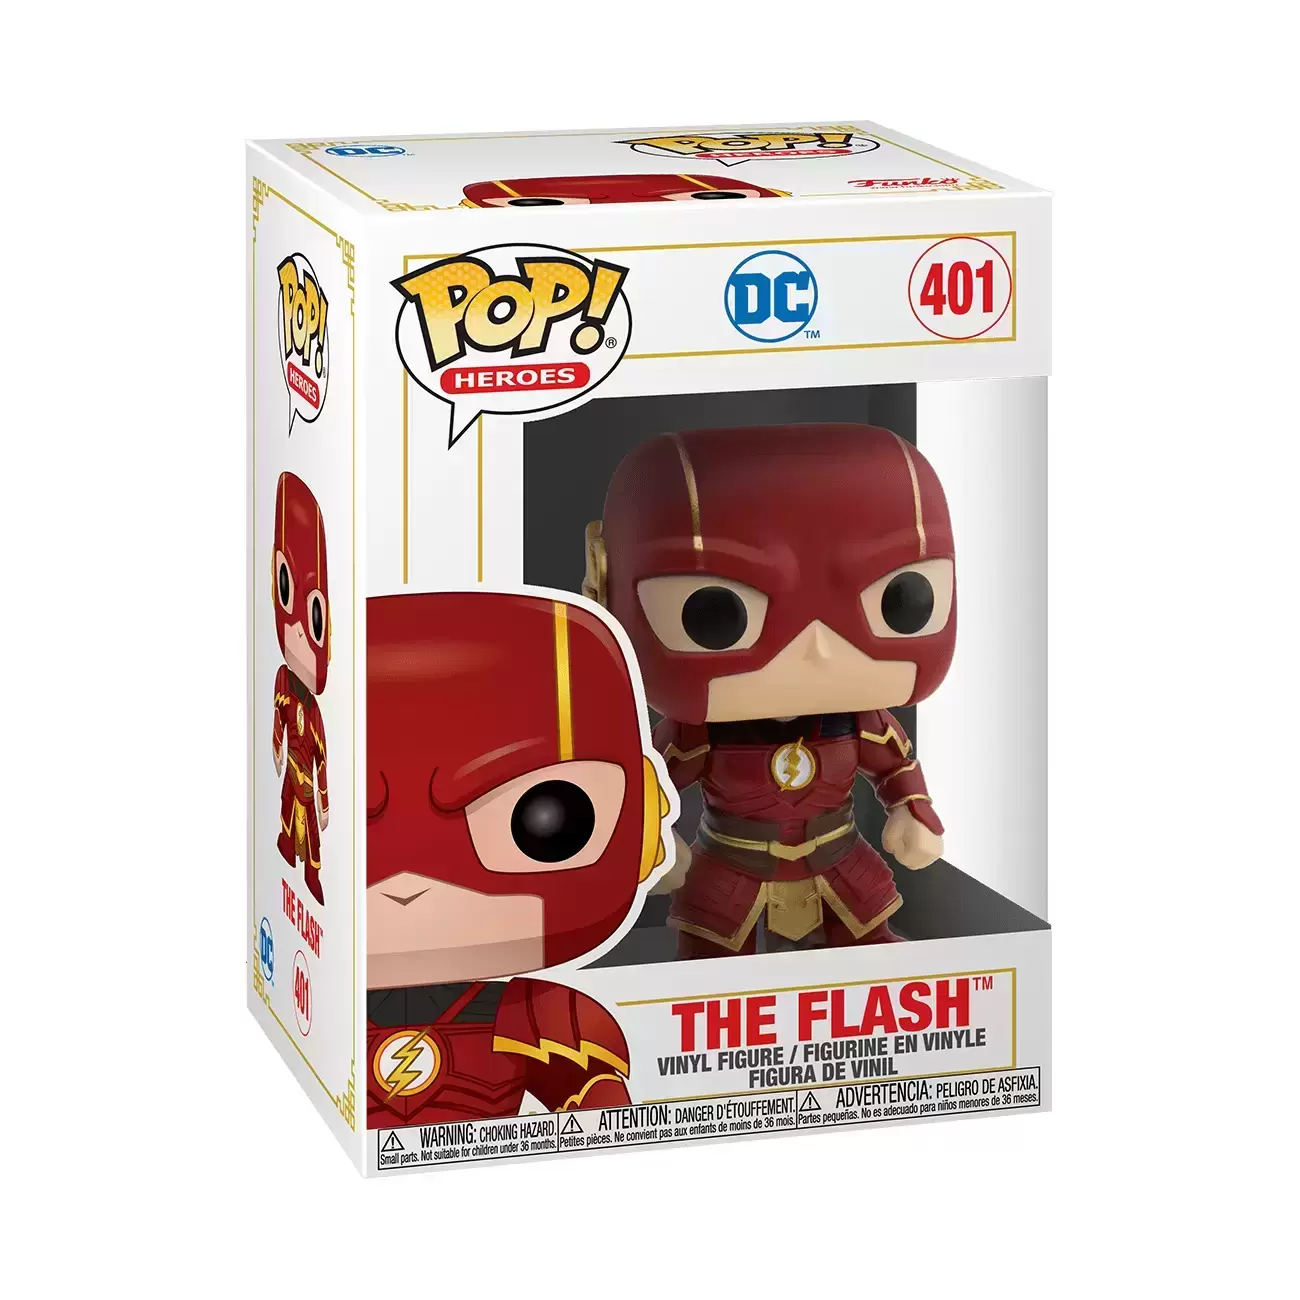 POP! Heroes - DC Comics - Imperial Palace The Flash